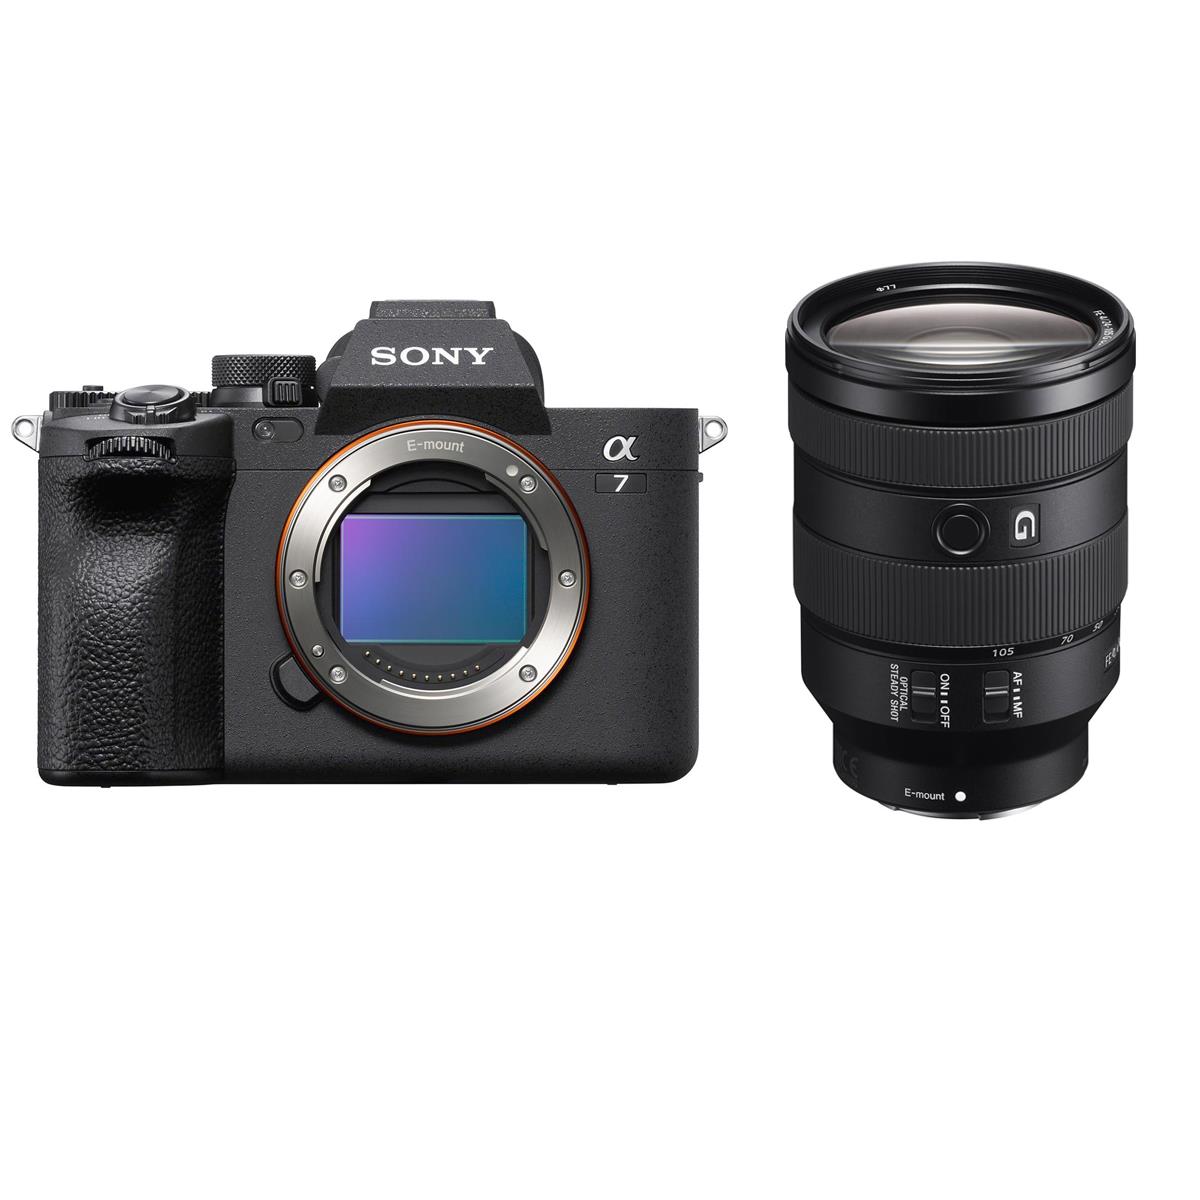 Image of Sony Alpha a7 IV Mirrorless Camera with FE 24-105mm f/4 G OSS Lens